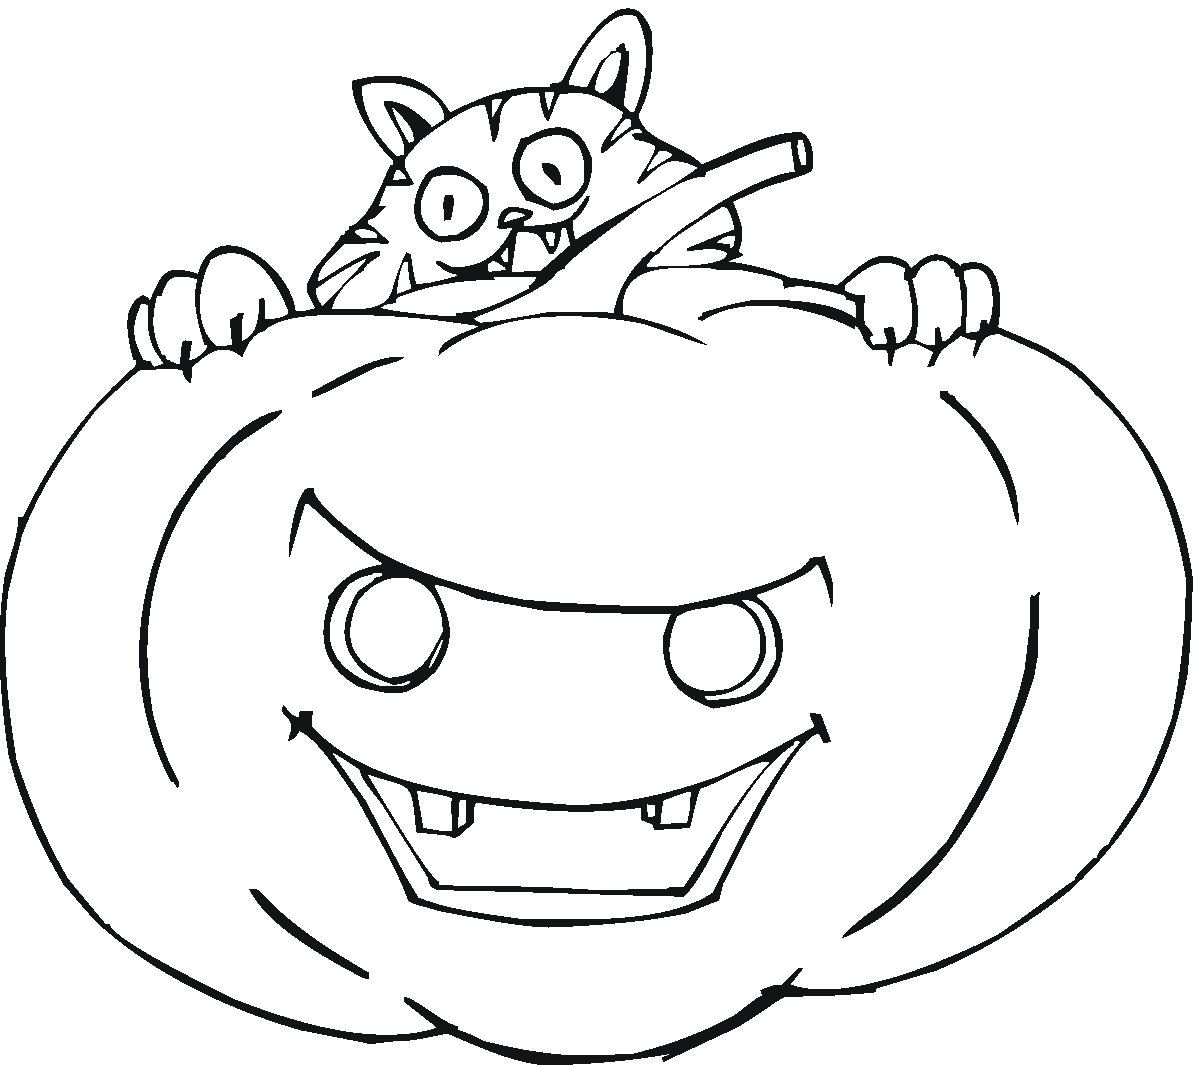 halloween pumpkin pictures to print and color pumpkin coloring pages 360coloringpages to print halloween and pumpkin pictures color 